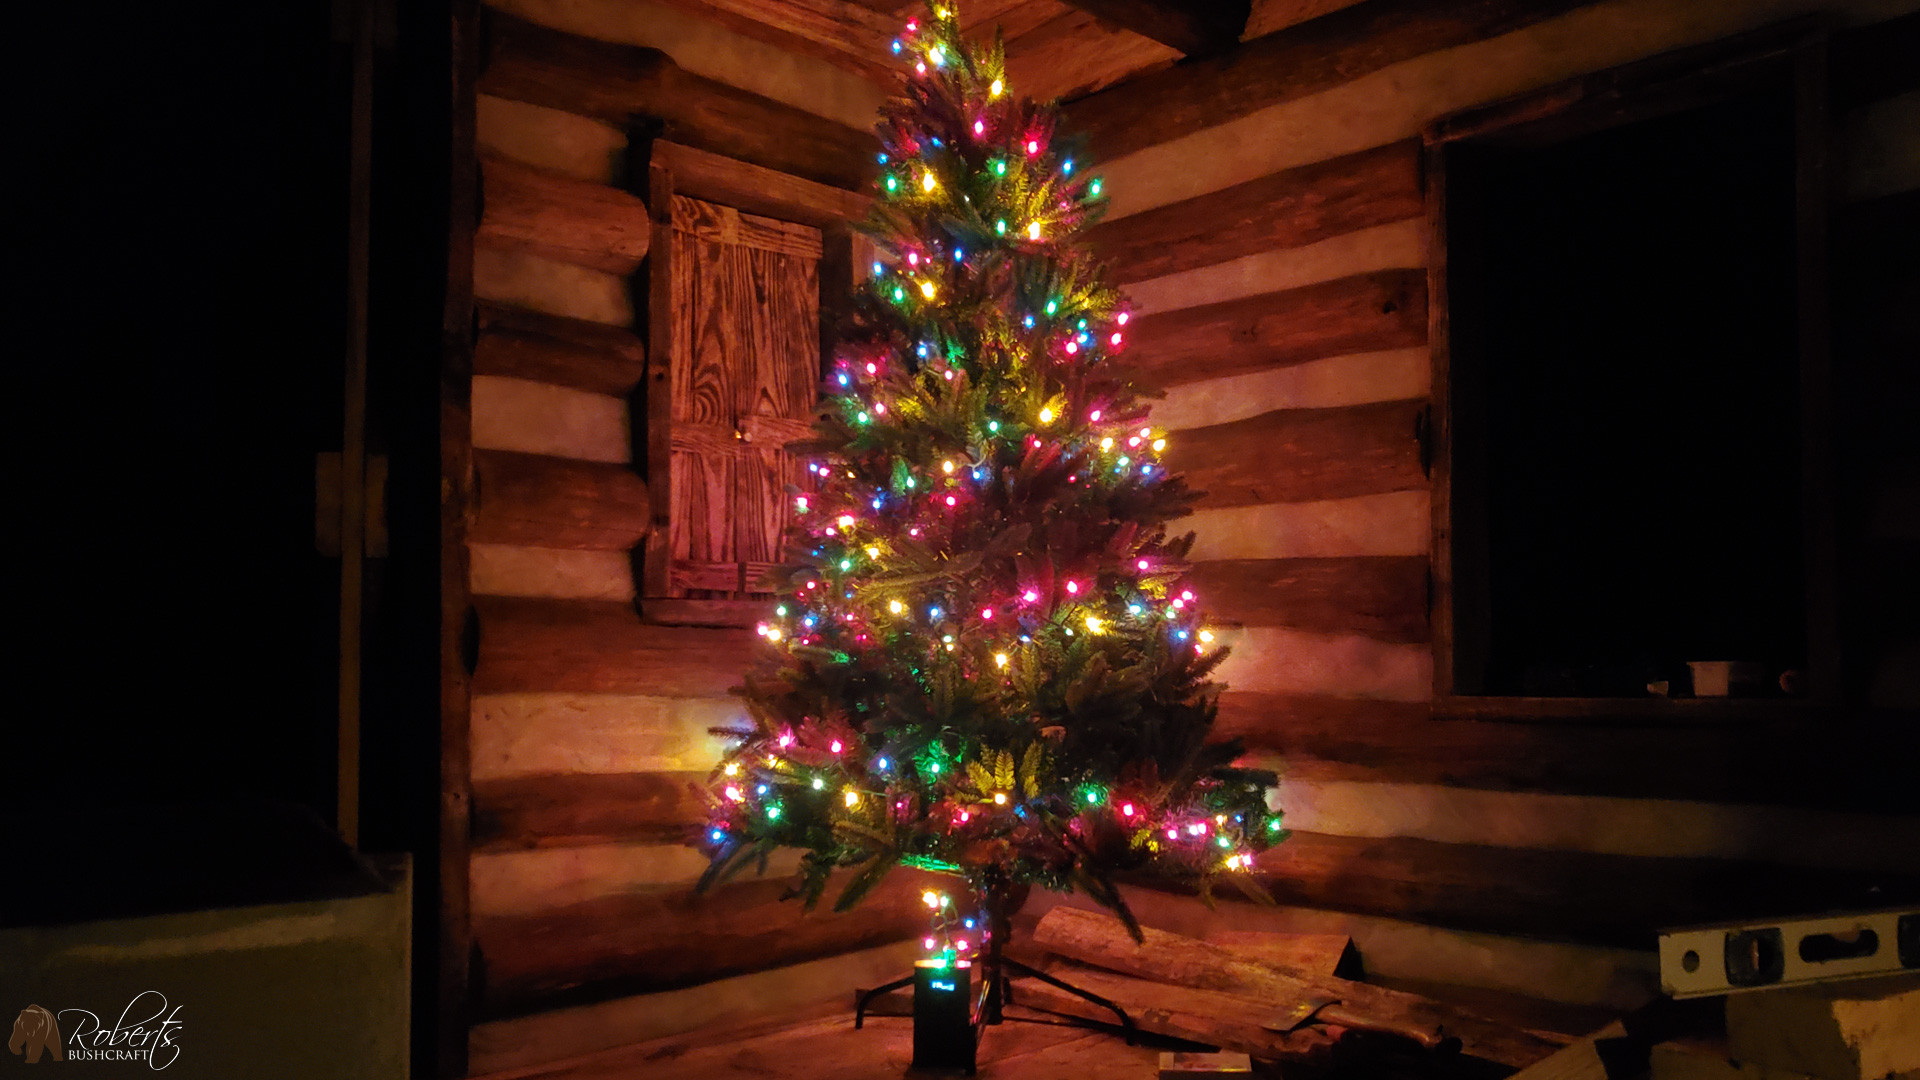 Our very first Christmas tree in our cabin